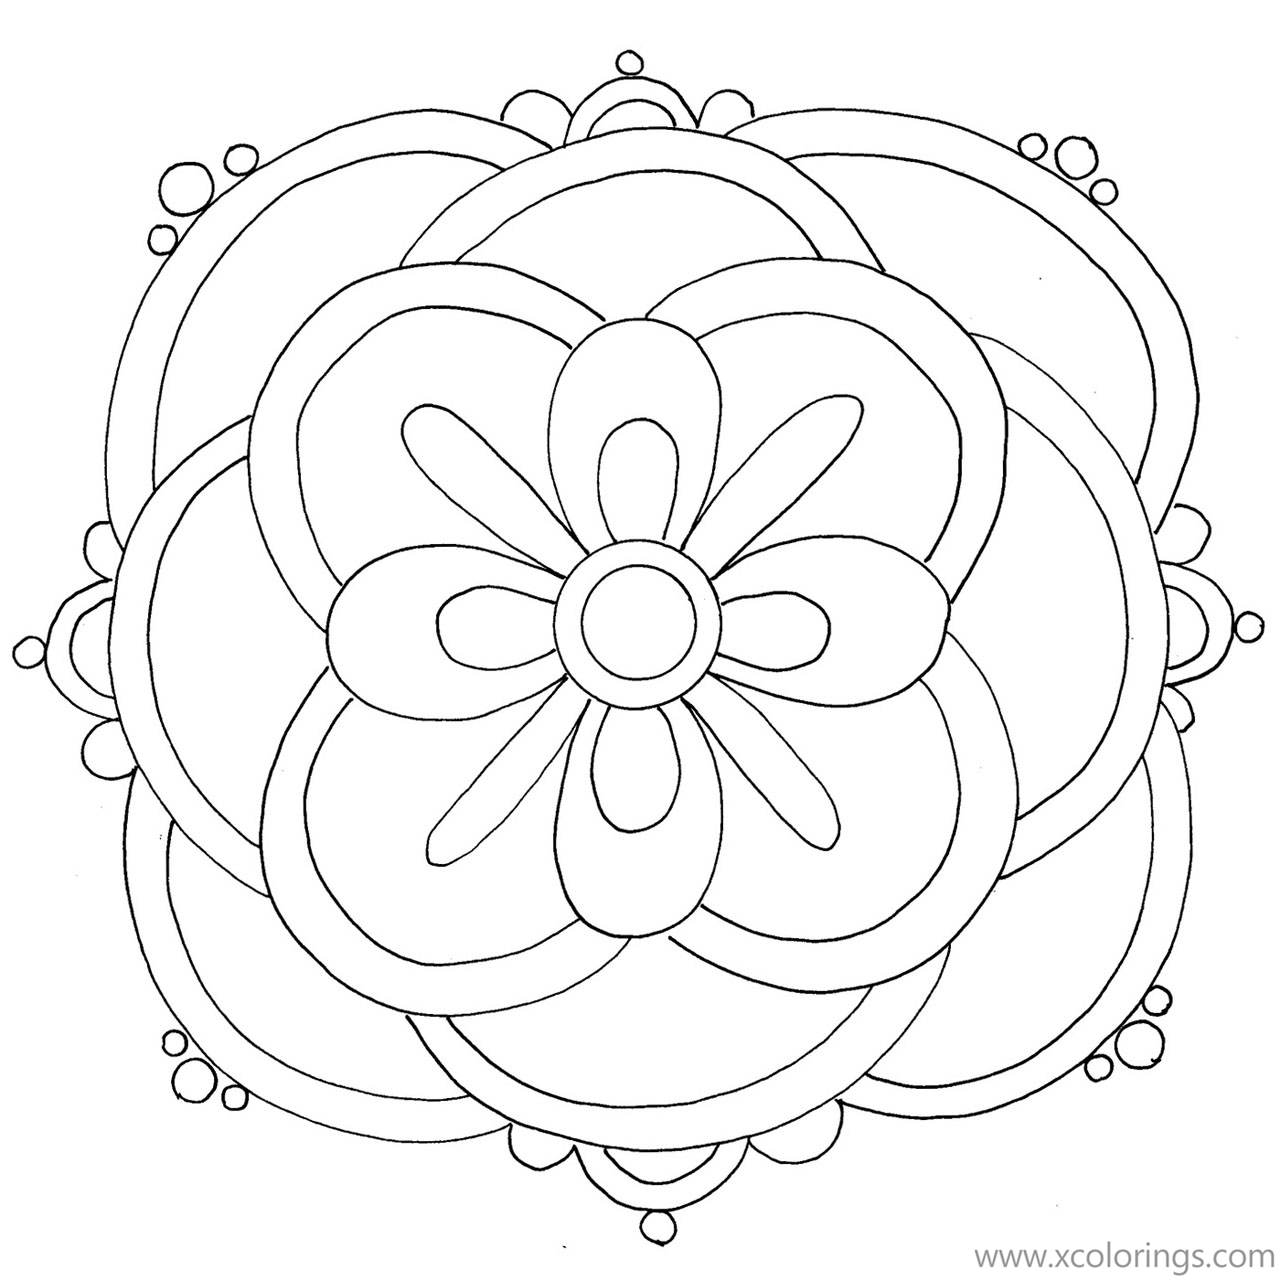 Free Rangoli Coloring Pages for Festival of Lights printable